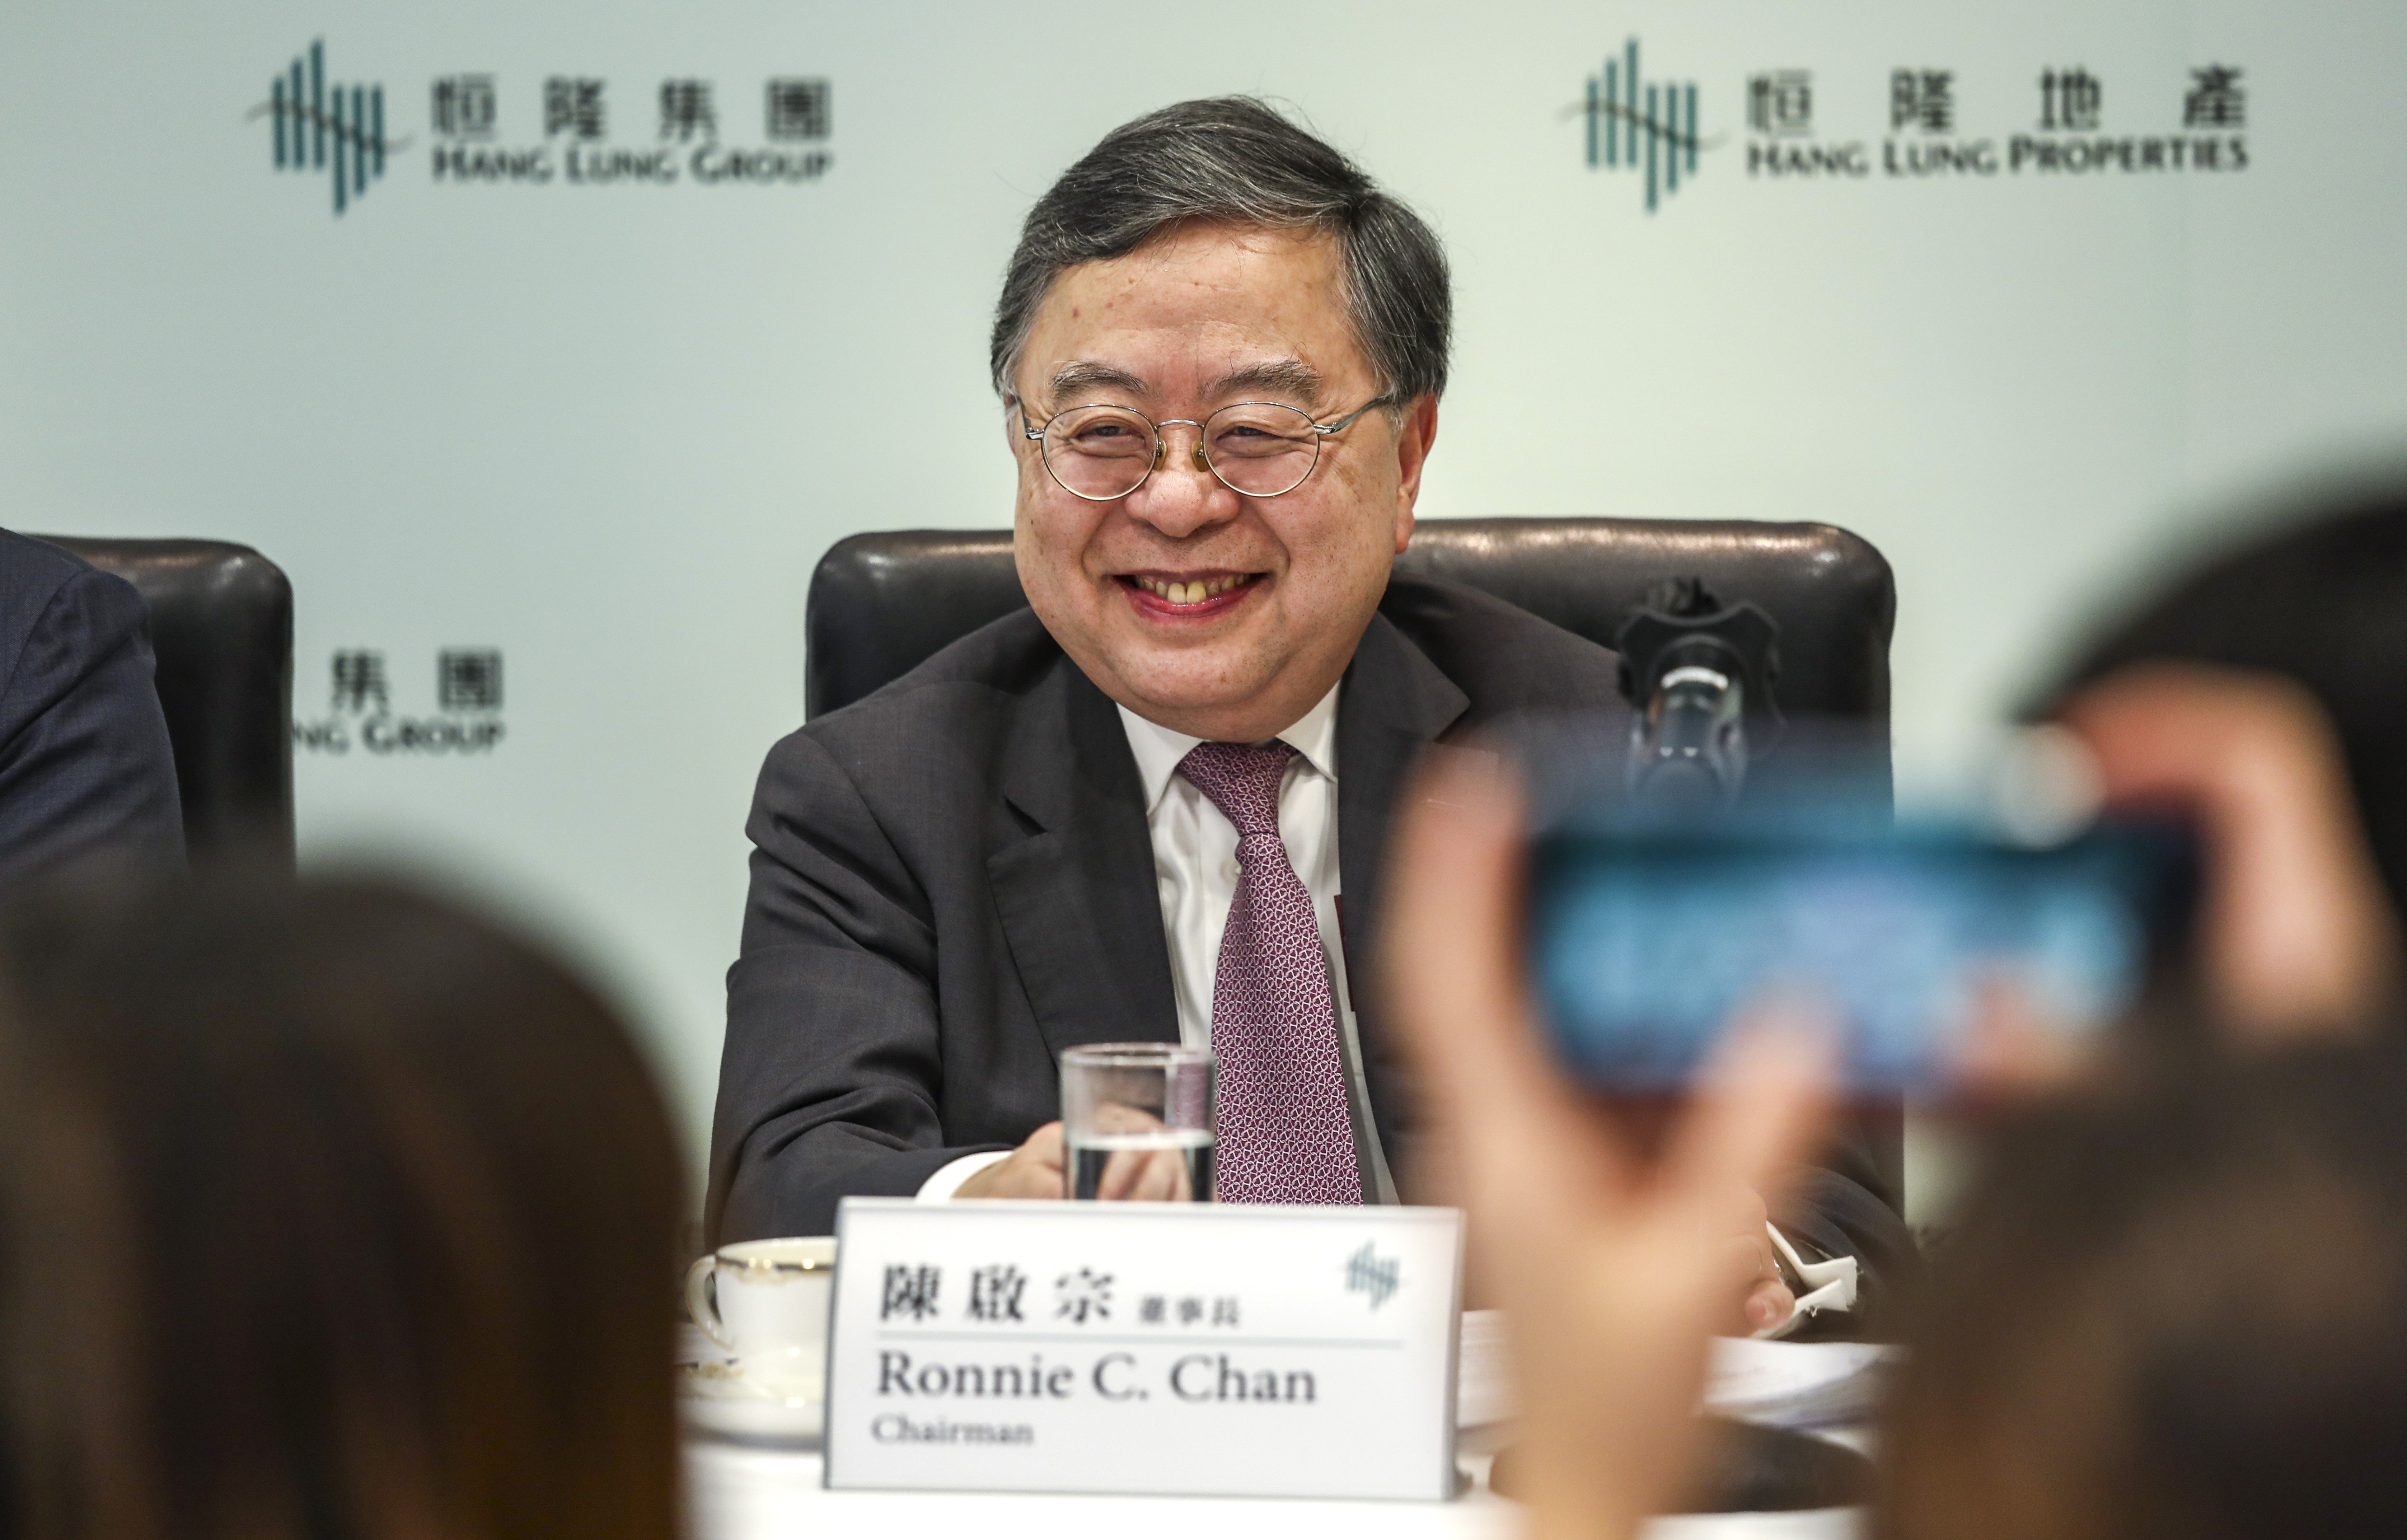 Hang Lung Properties chairman Ronnie Chan Chi-chung said on Thursday that the ongoing unrest has negatively affected business and hurt confidence among the international business community. Photo: Tory Ho